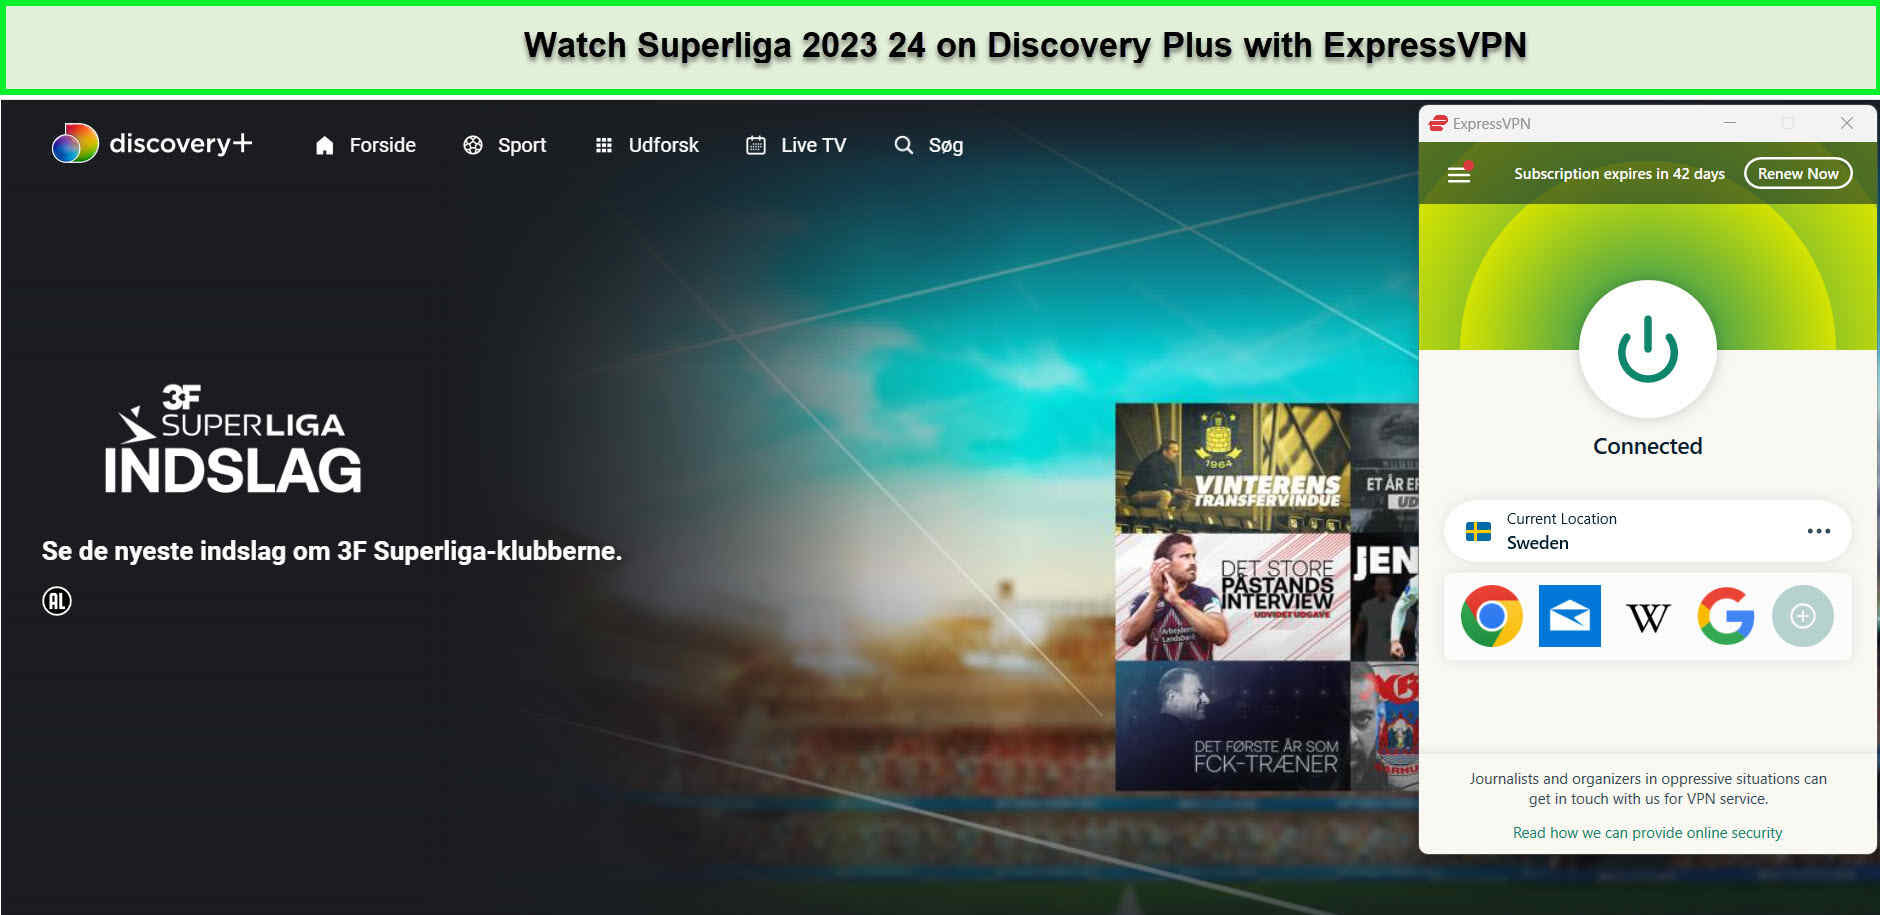 Watch-Superliga-2023-24-in-Australia-on-Discovery-Plus-with-ExpressVPN!